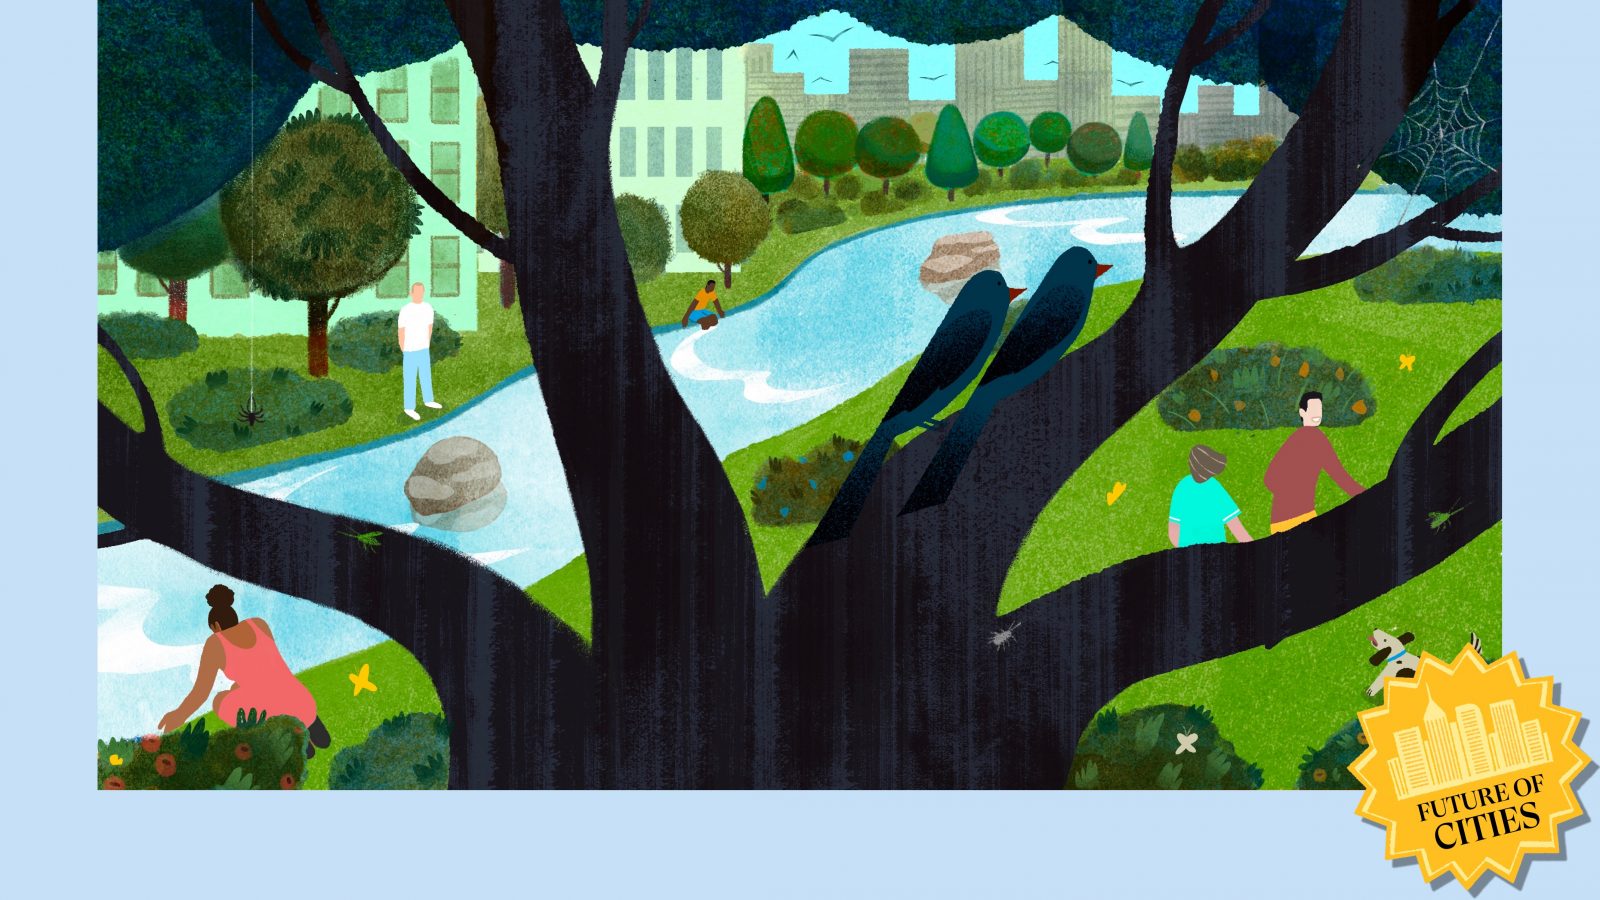 Illustration of a lush, green city park by a river, with a tree in the foreground